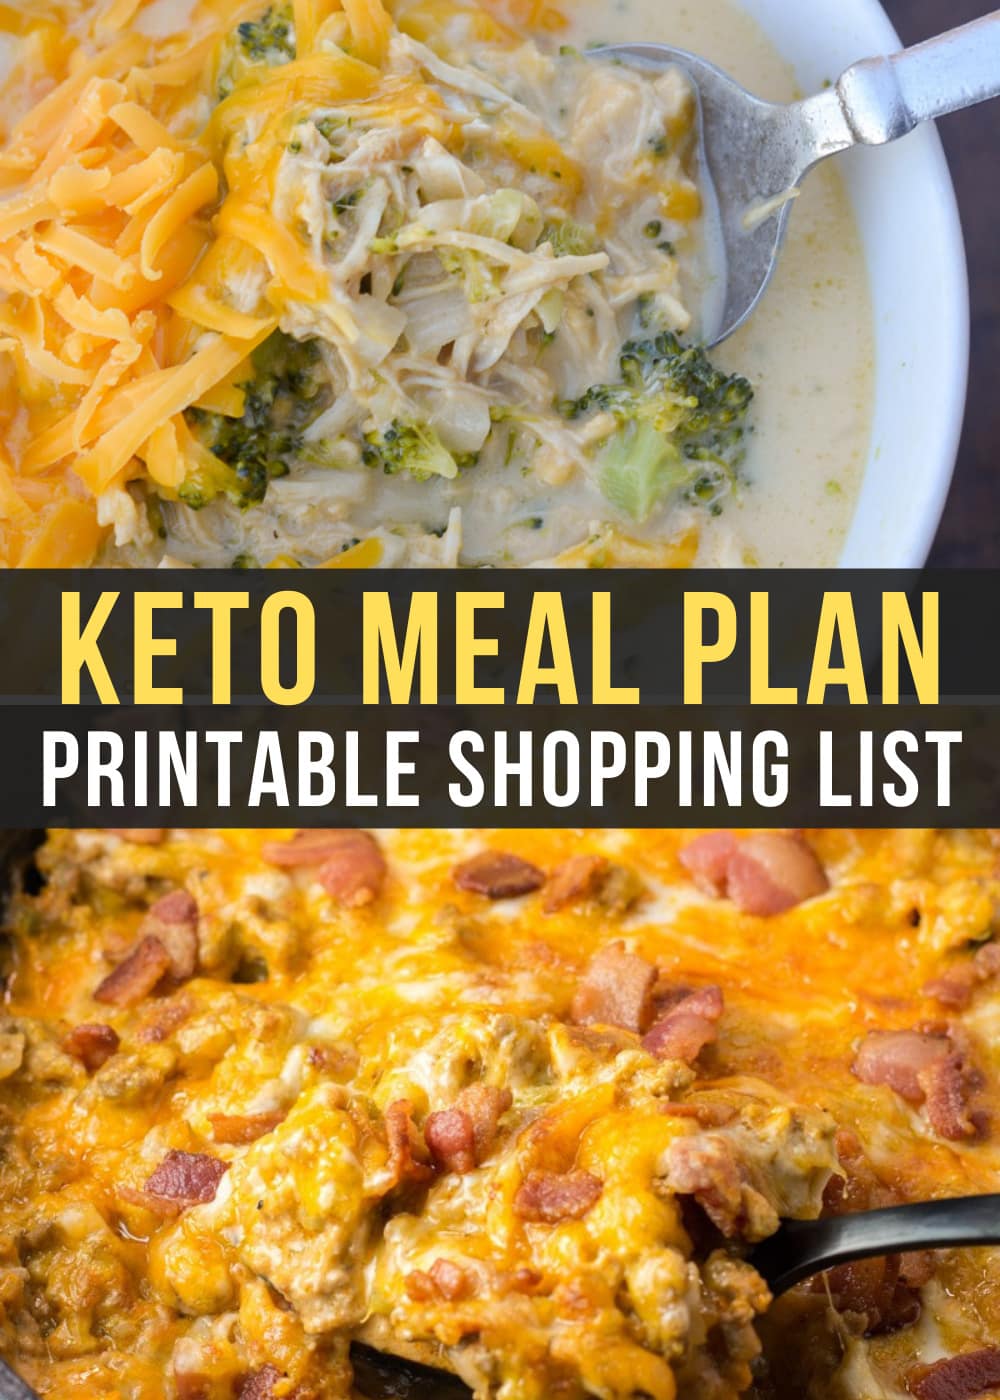 This Easy Keto Meal Plan includes 5 delicious keto dinners and a low-carb meal prep breakfast recipe! Use the printable shopping list and meal prep tips for a simple week on keto!